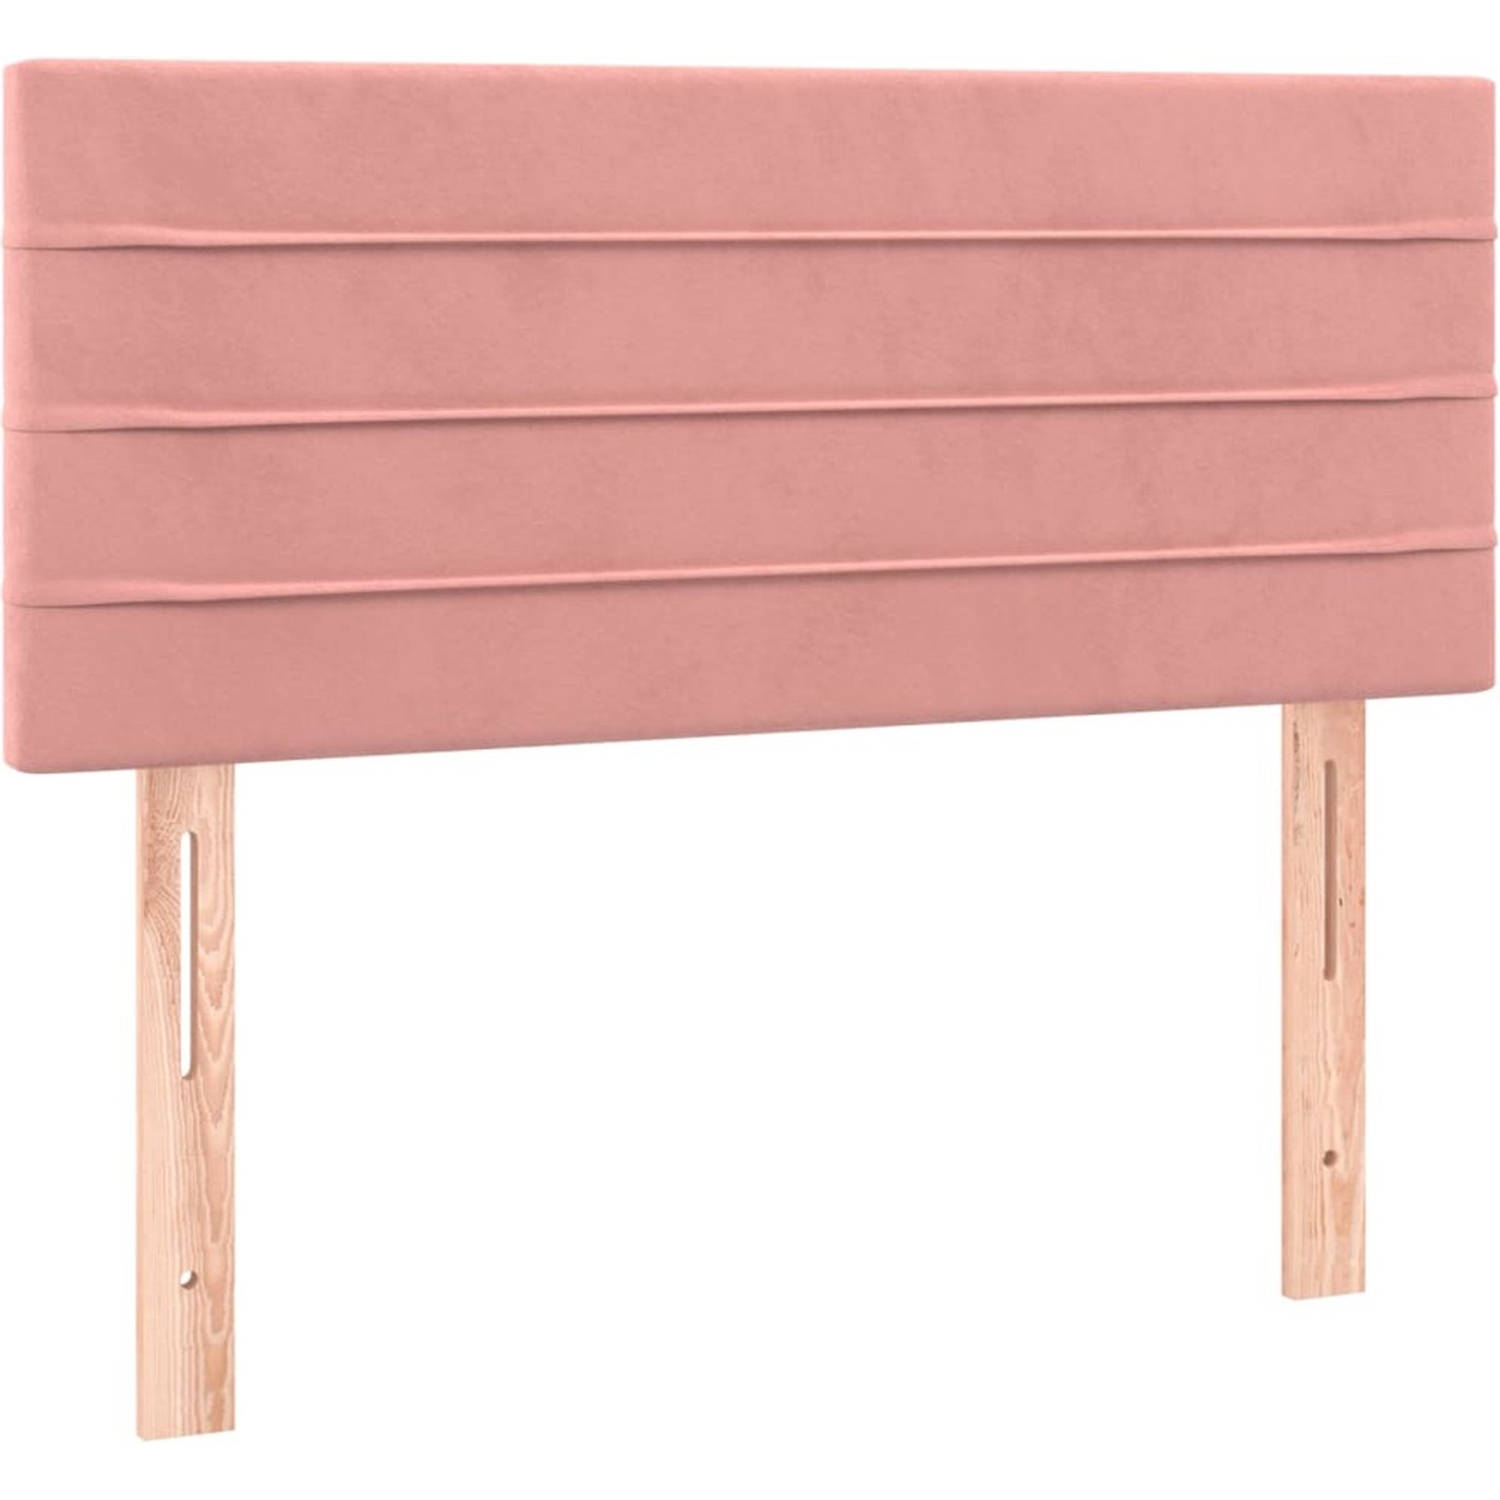 The Living Store Boxspring Bed - Roze Fluweel - 120 x 200 cm - LED Verlichting